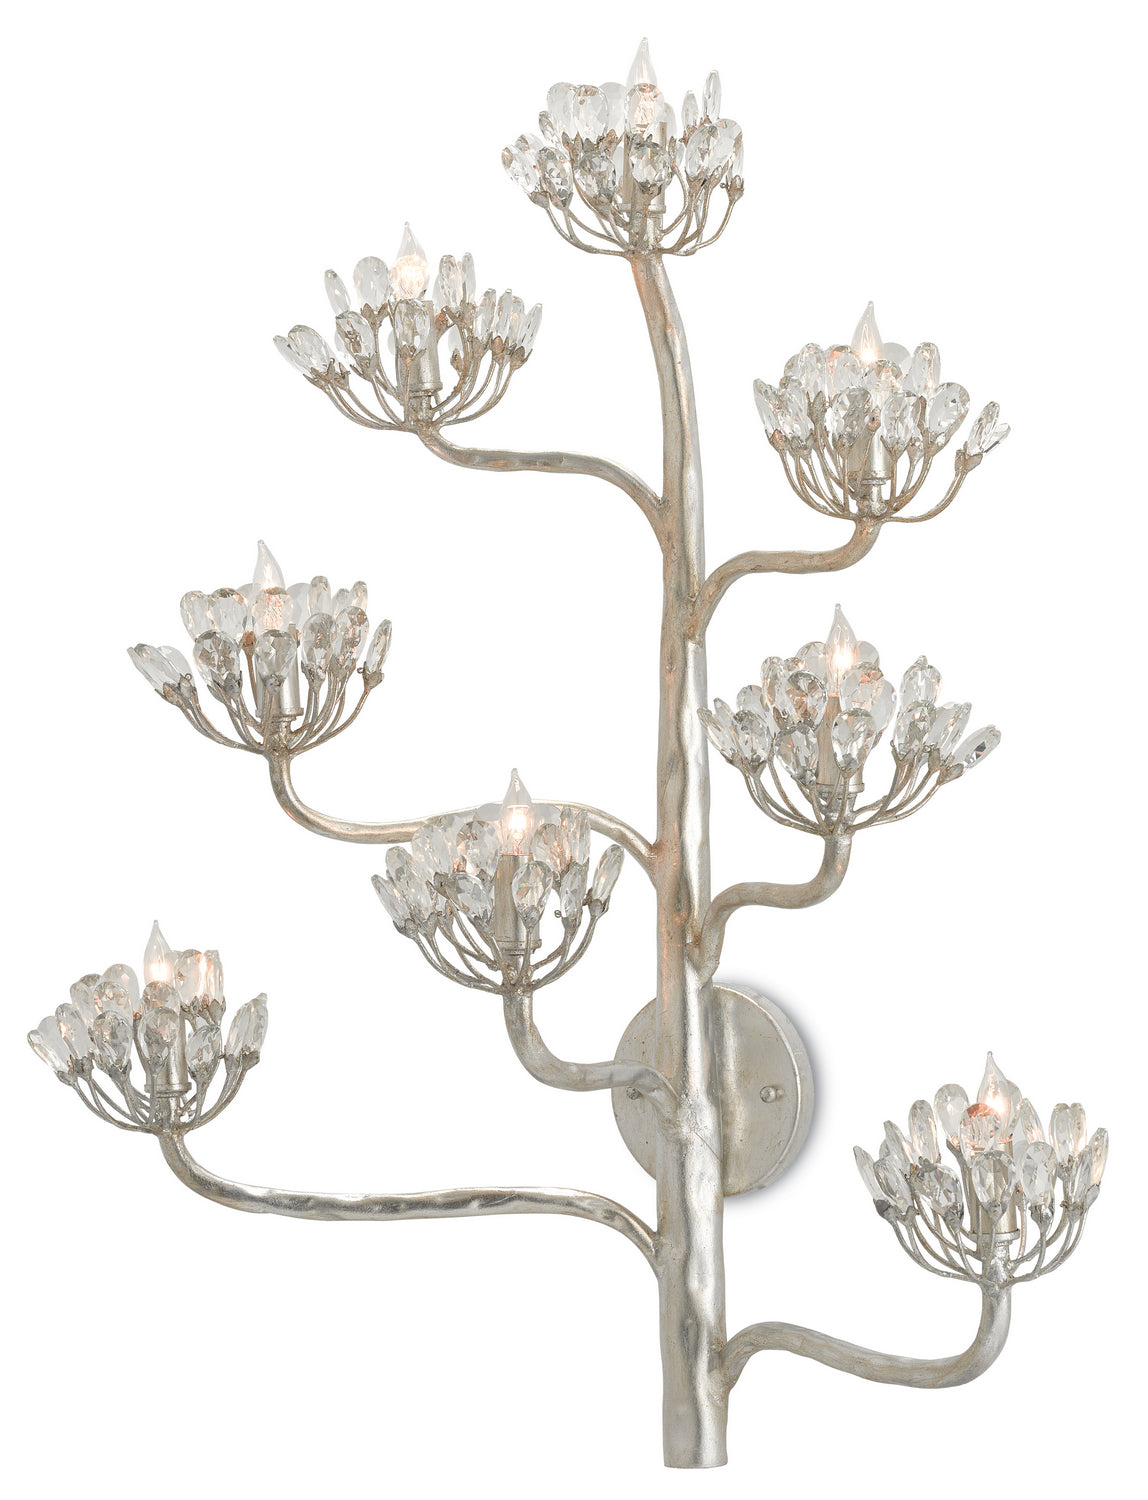 Eight Light Wall Sconce from the Marjorie Skouras collection in Contemporary Silver Leaf finish